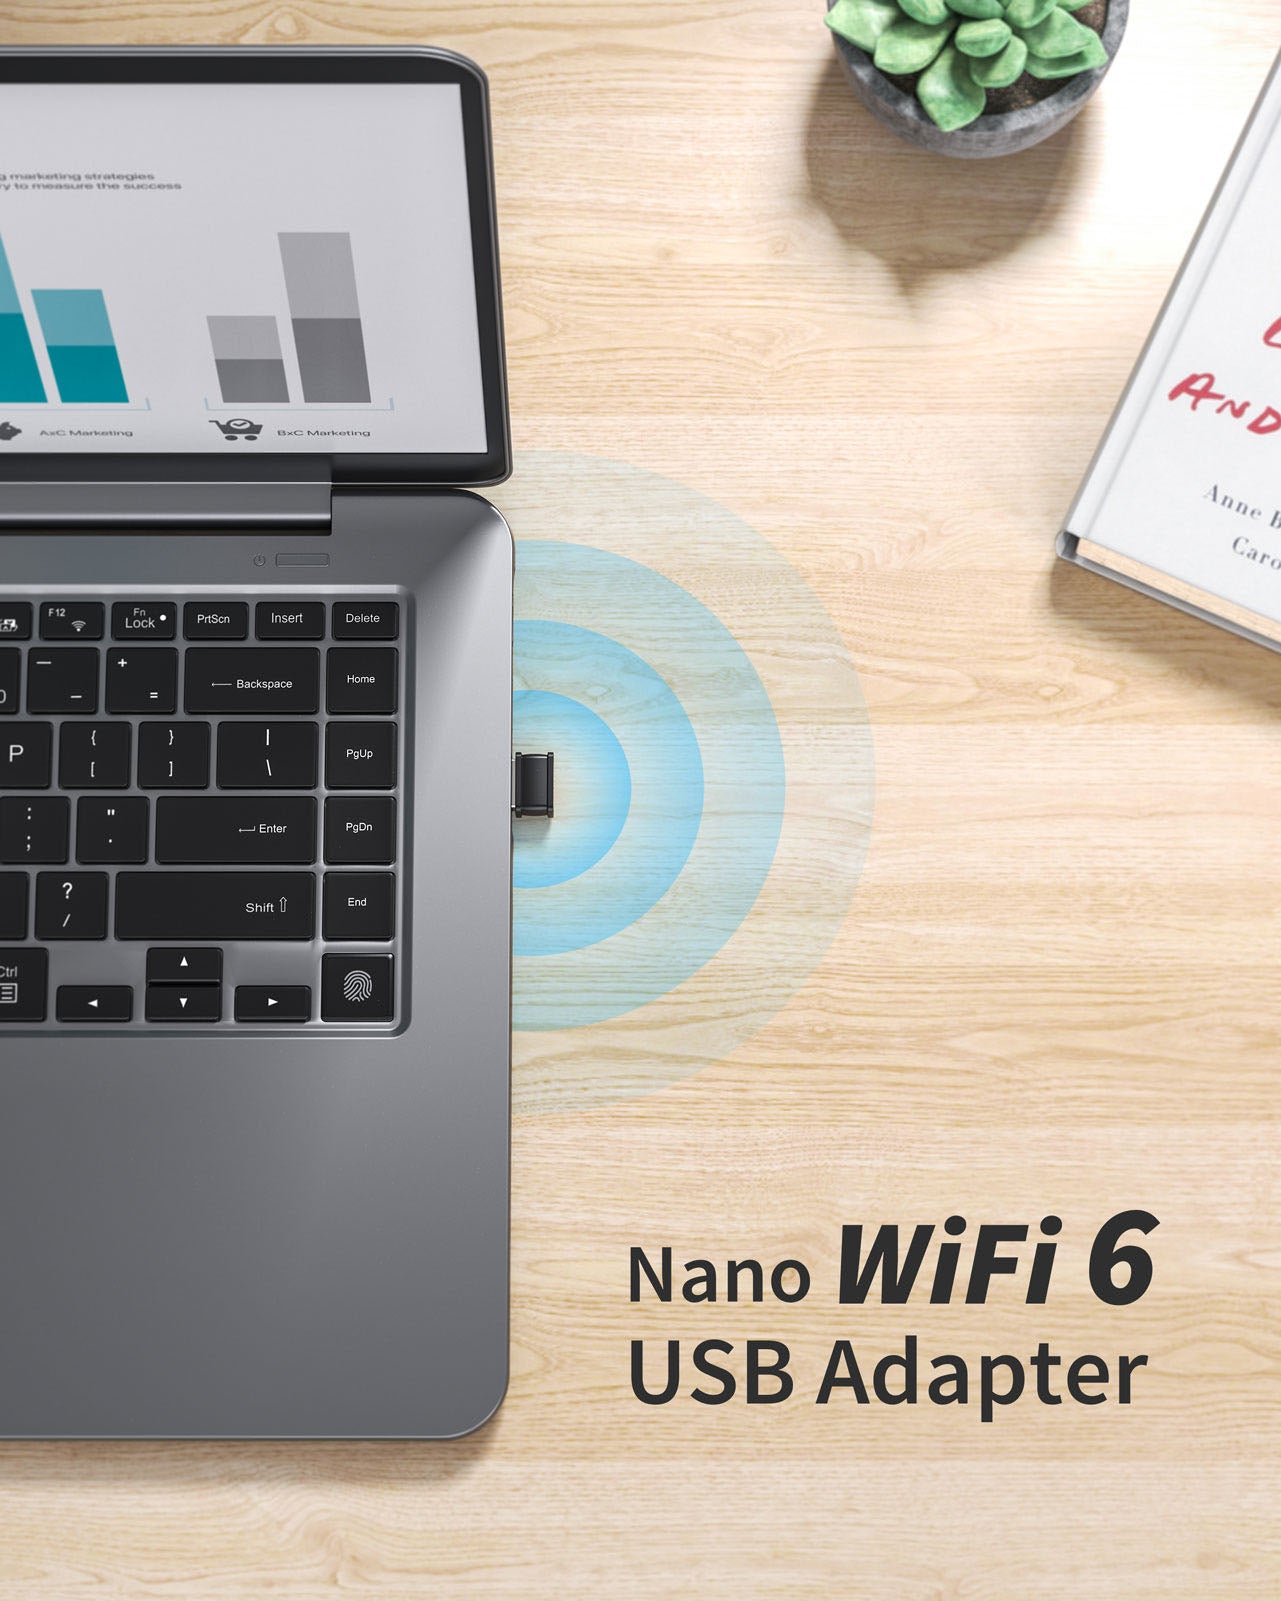 BrosTrend Nano WiFi 6 USB Adapter Is Plugged into a USB Port of a Laptop PC and Delivers Up to 286Mbps Fast Speeds